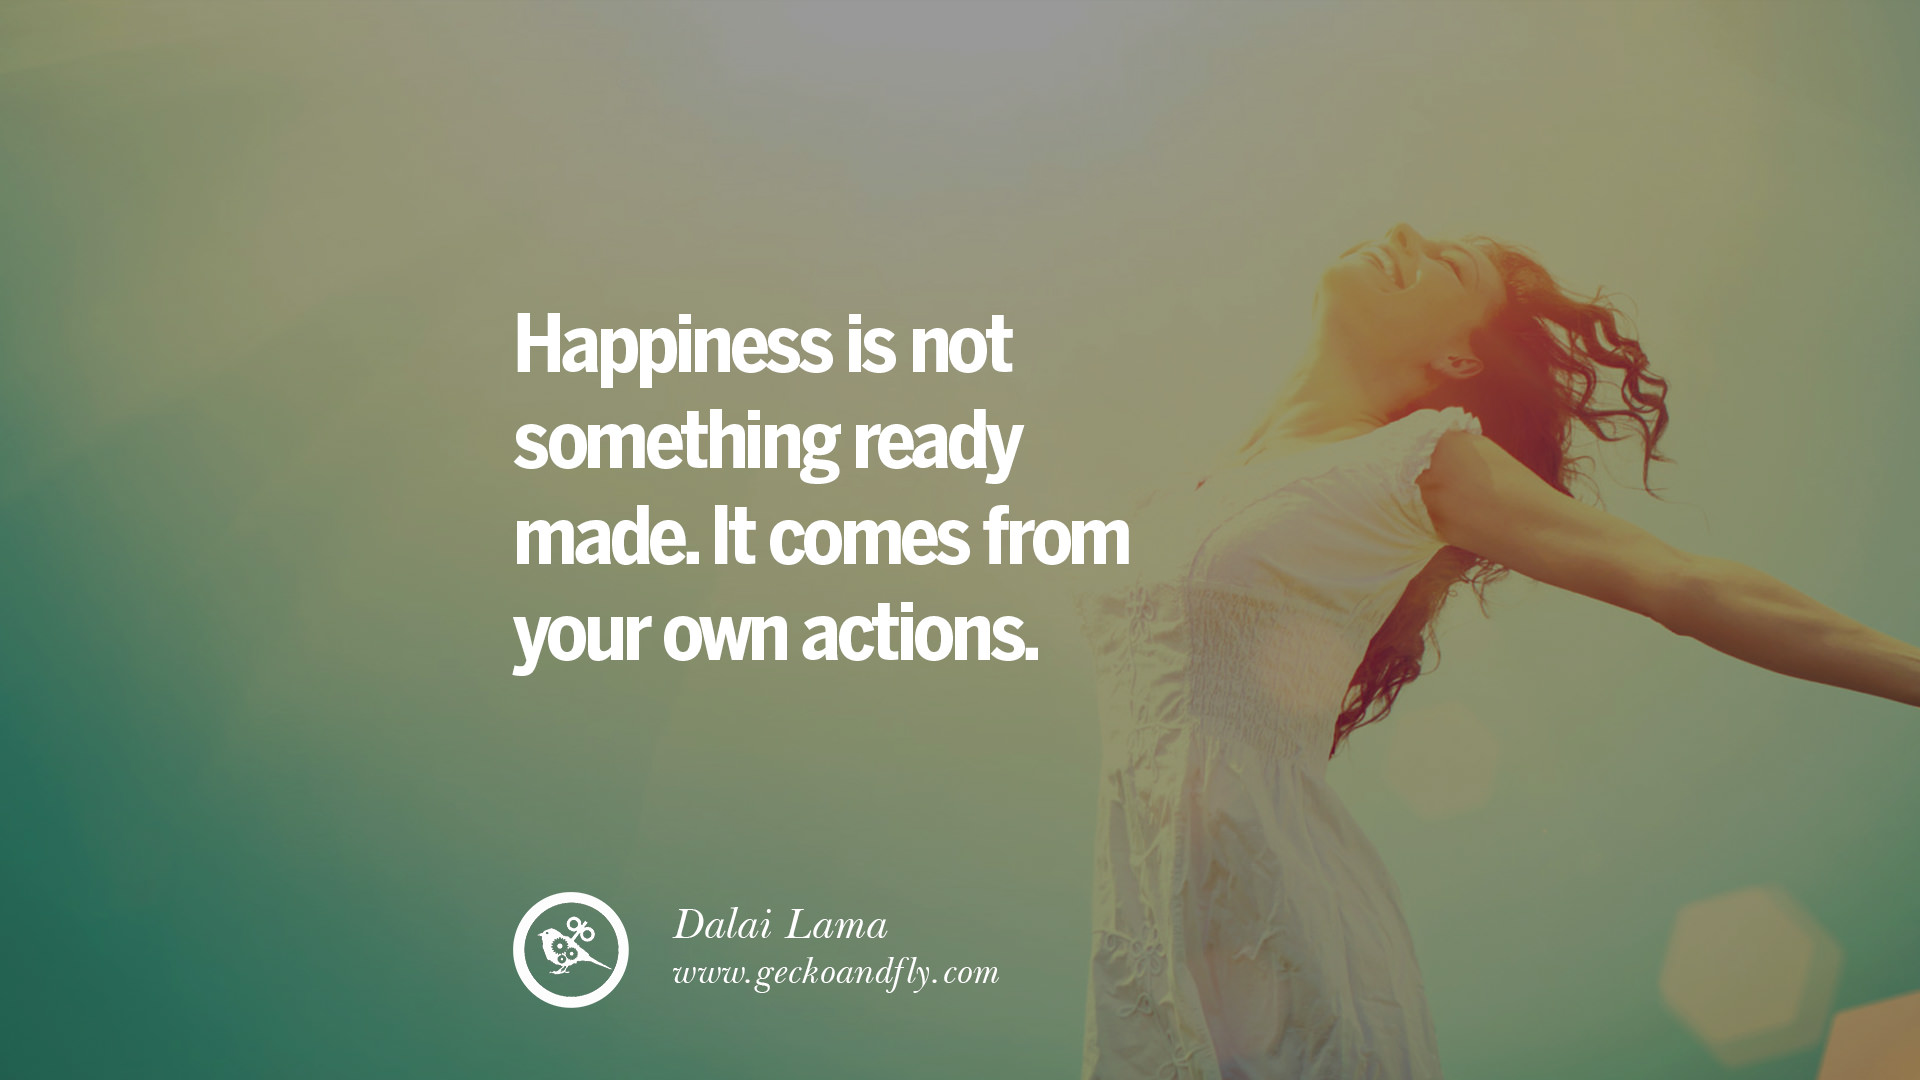 81 Inspiring Quotes On Life And The Pursuit Of Happiness